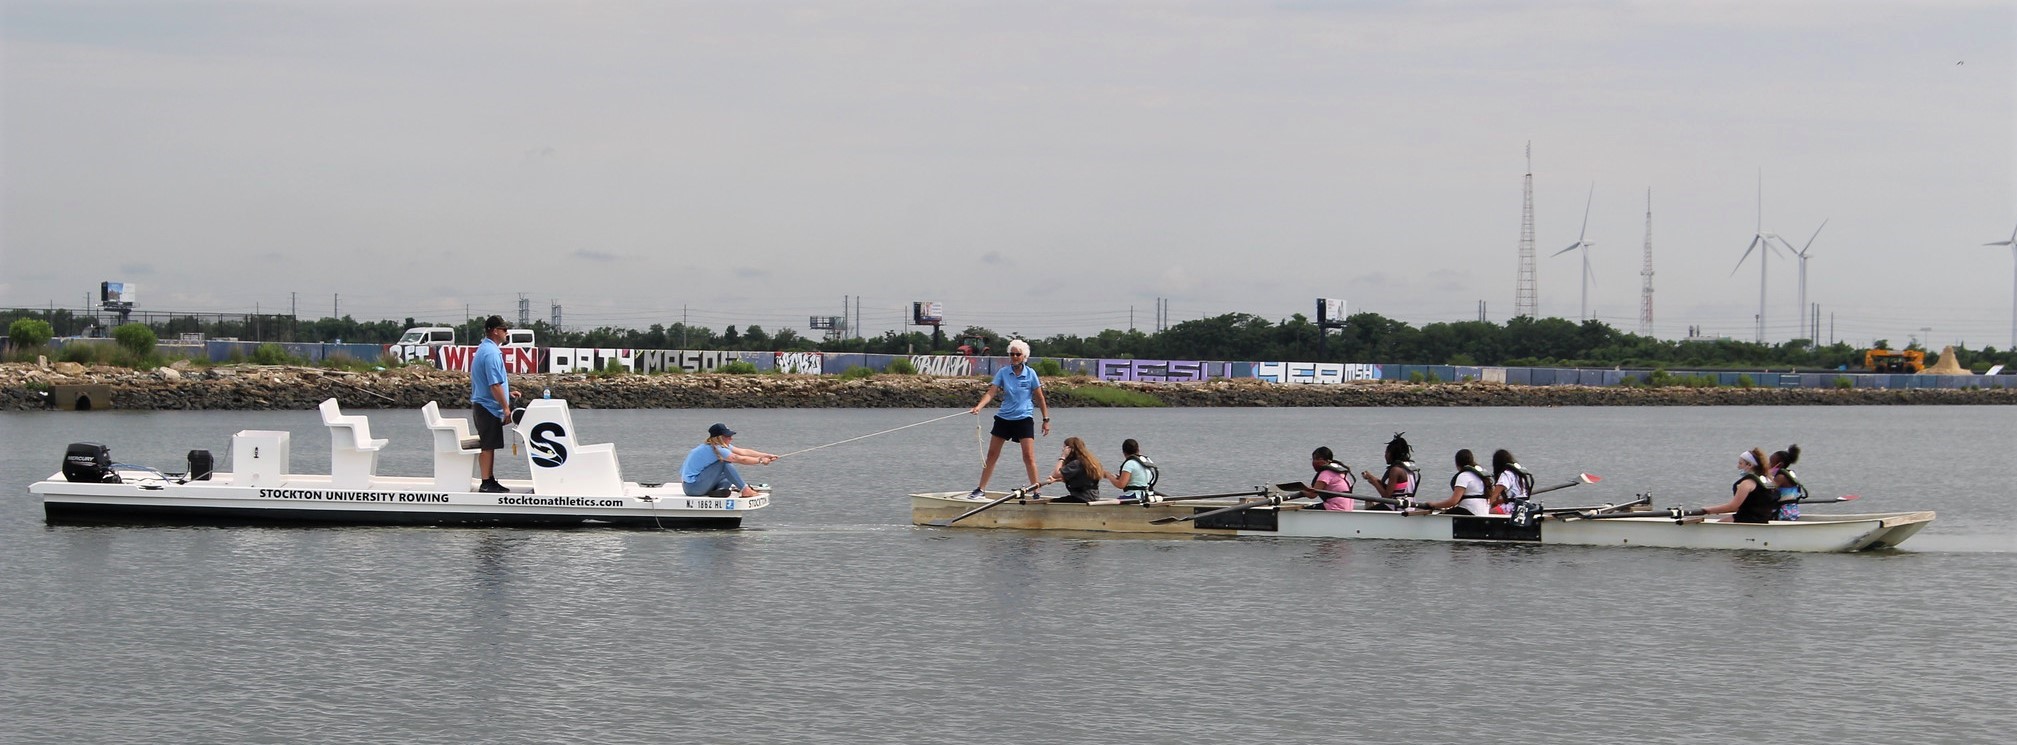 Rowers on bay